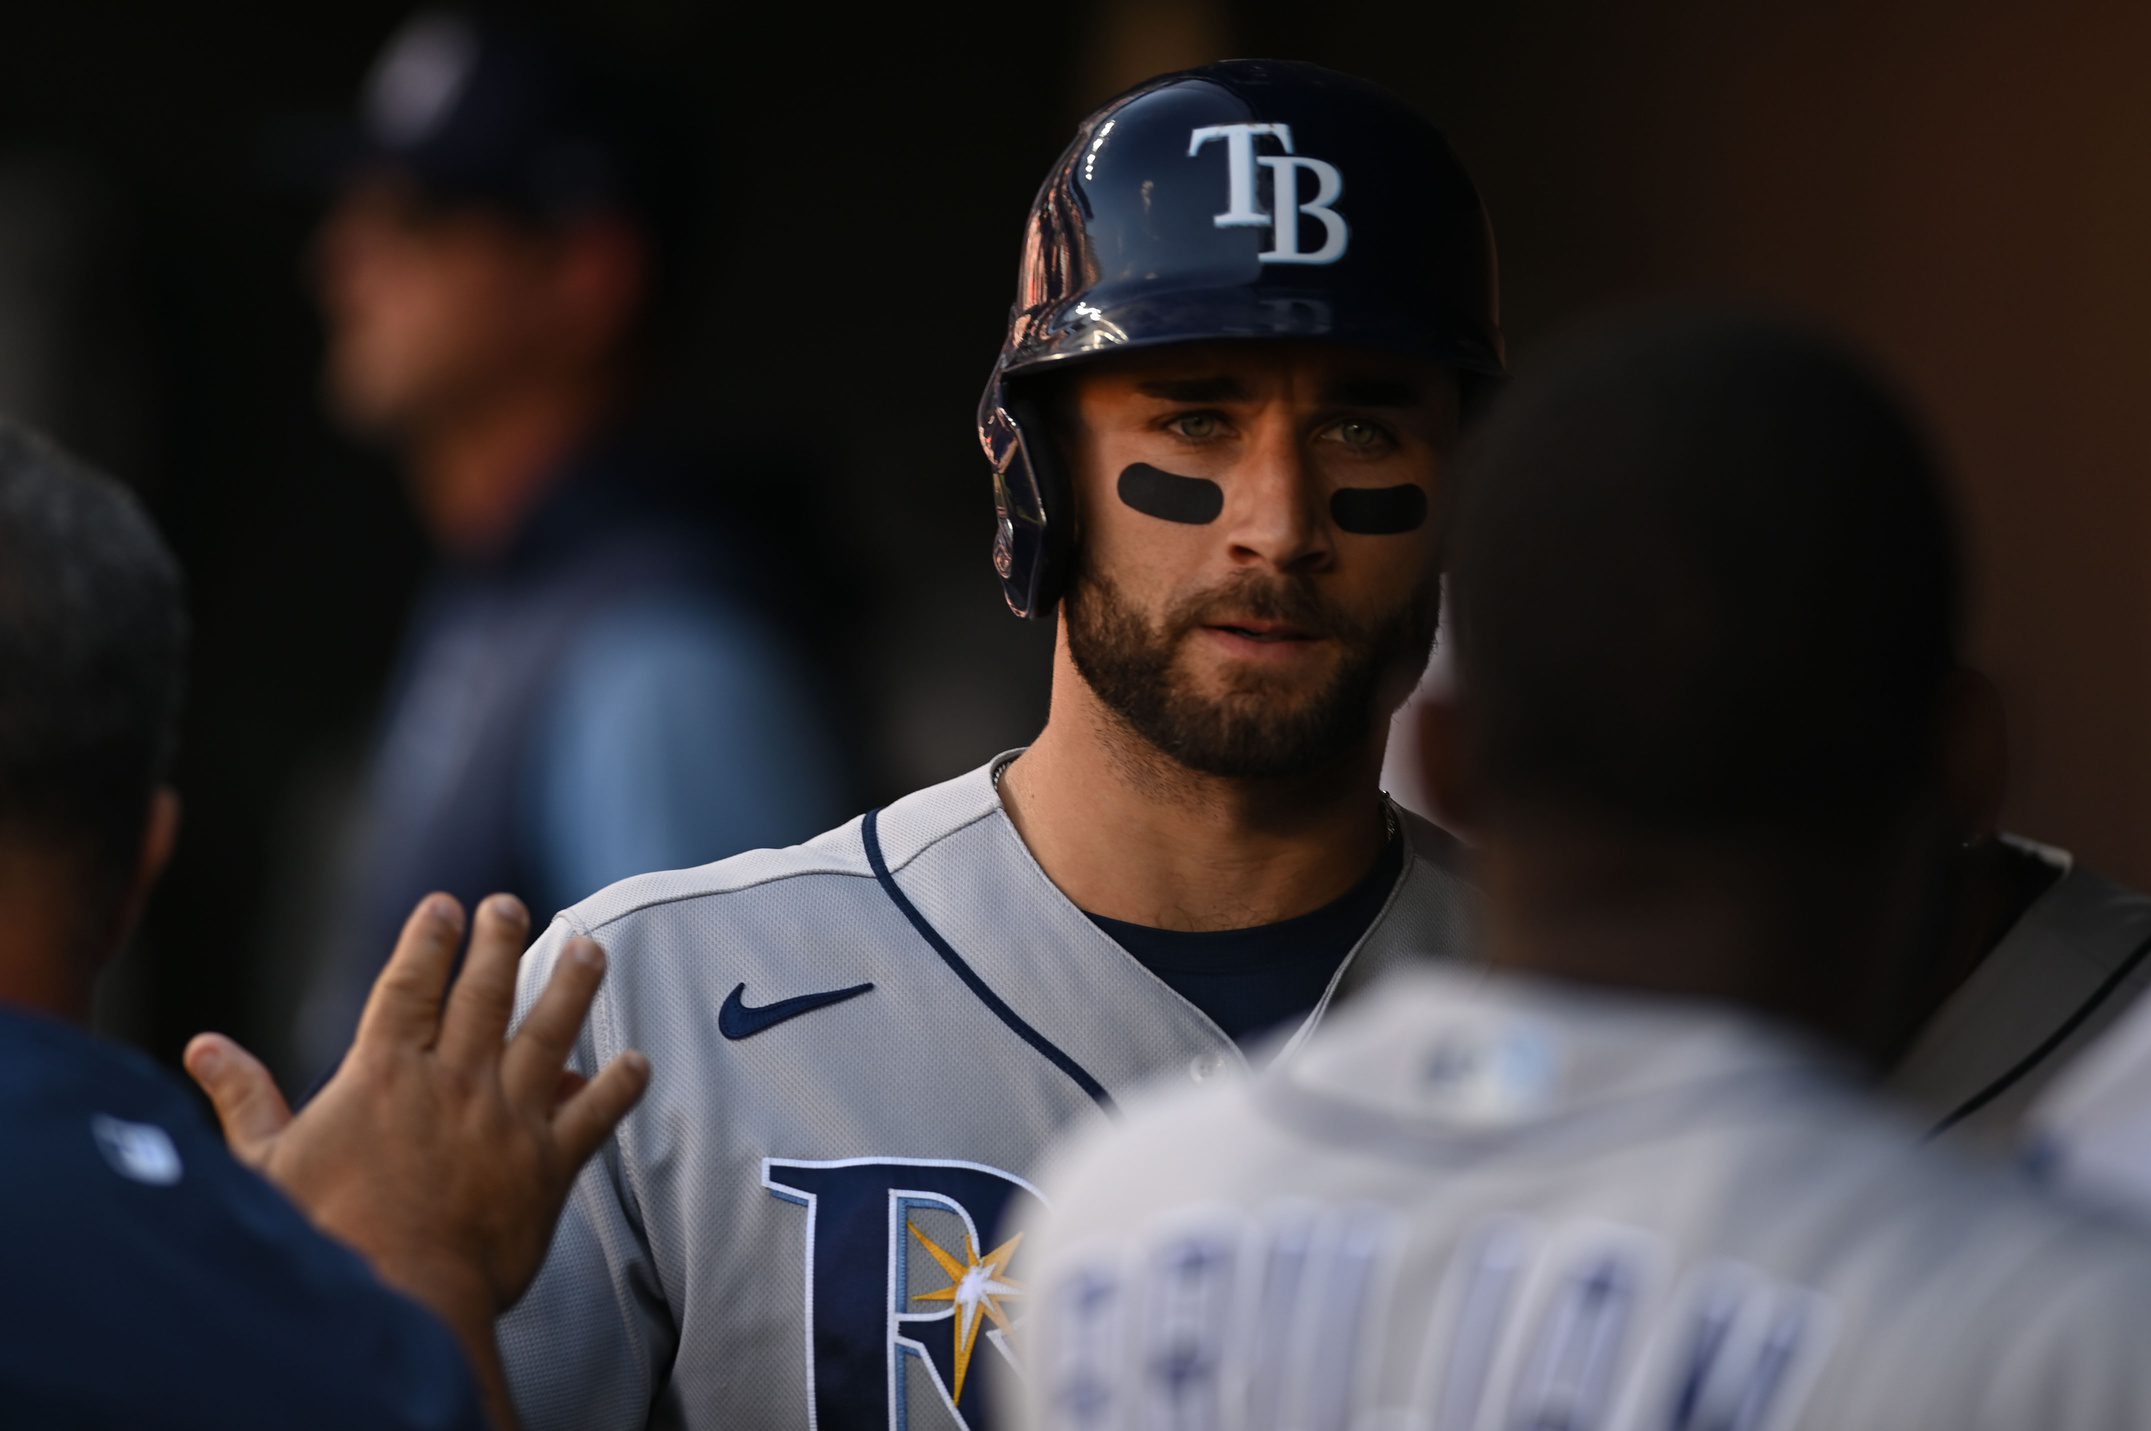 Tampa Bay Rays center fielder Kevin Kiermaier was through the dugout